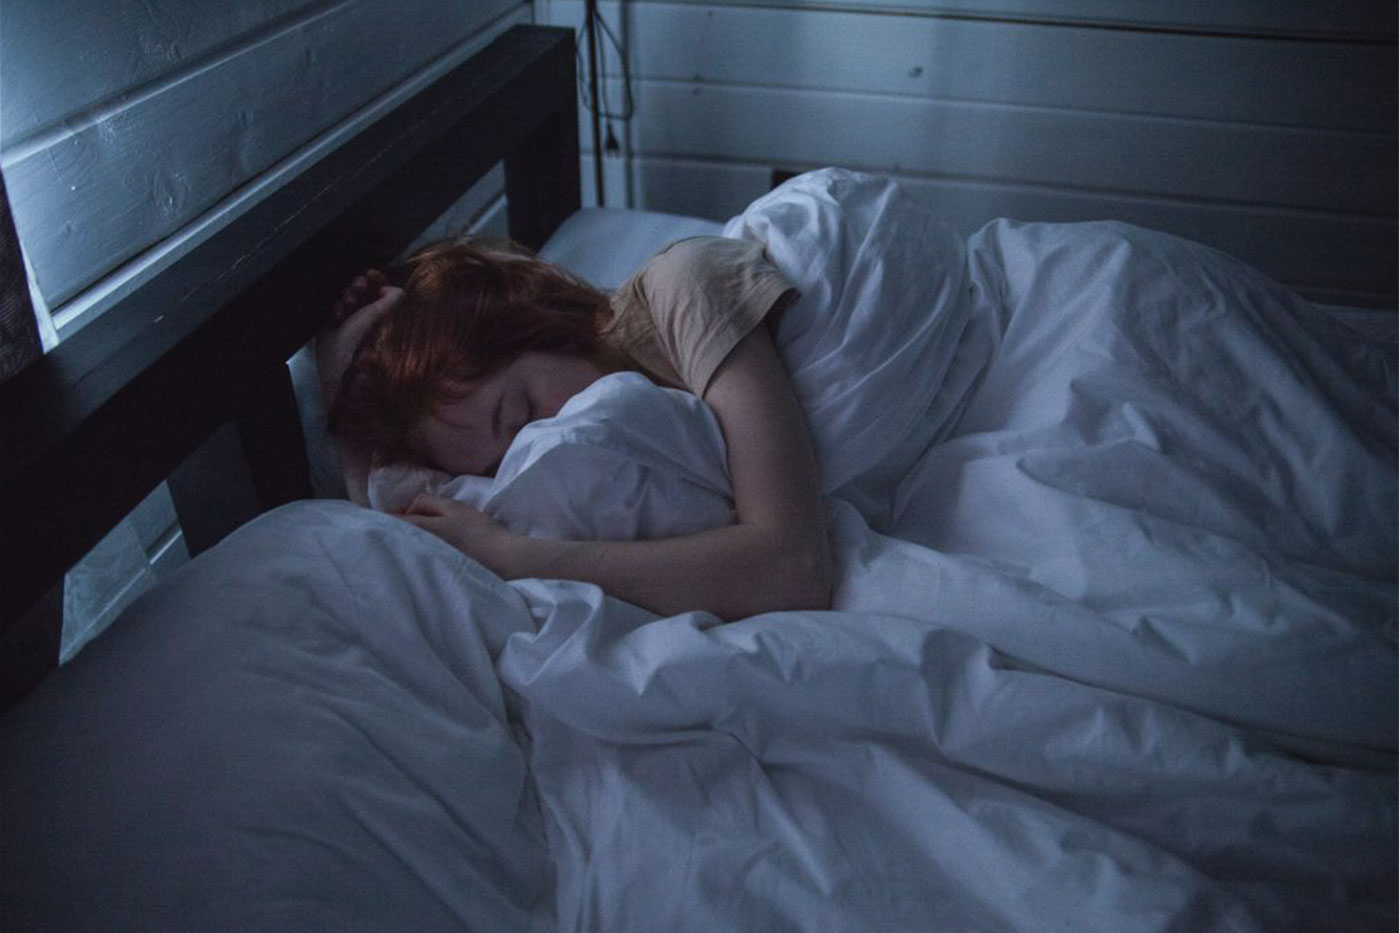 All That Binge Watching May Be Hurting Your Sleep